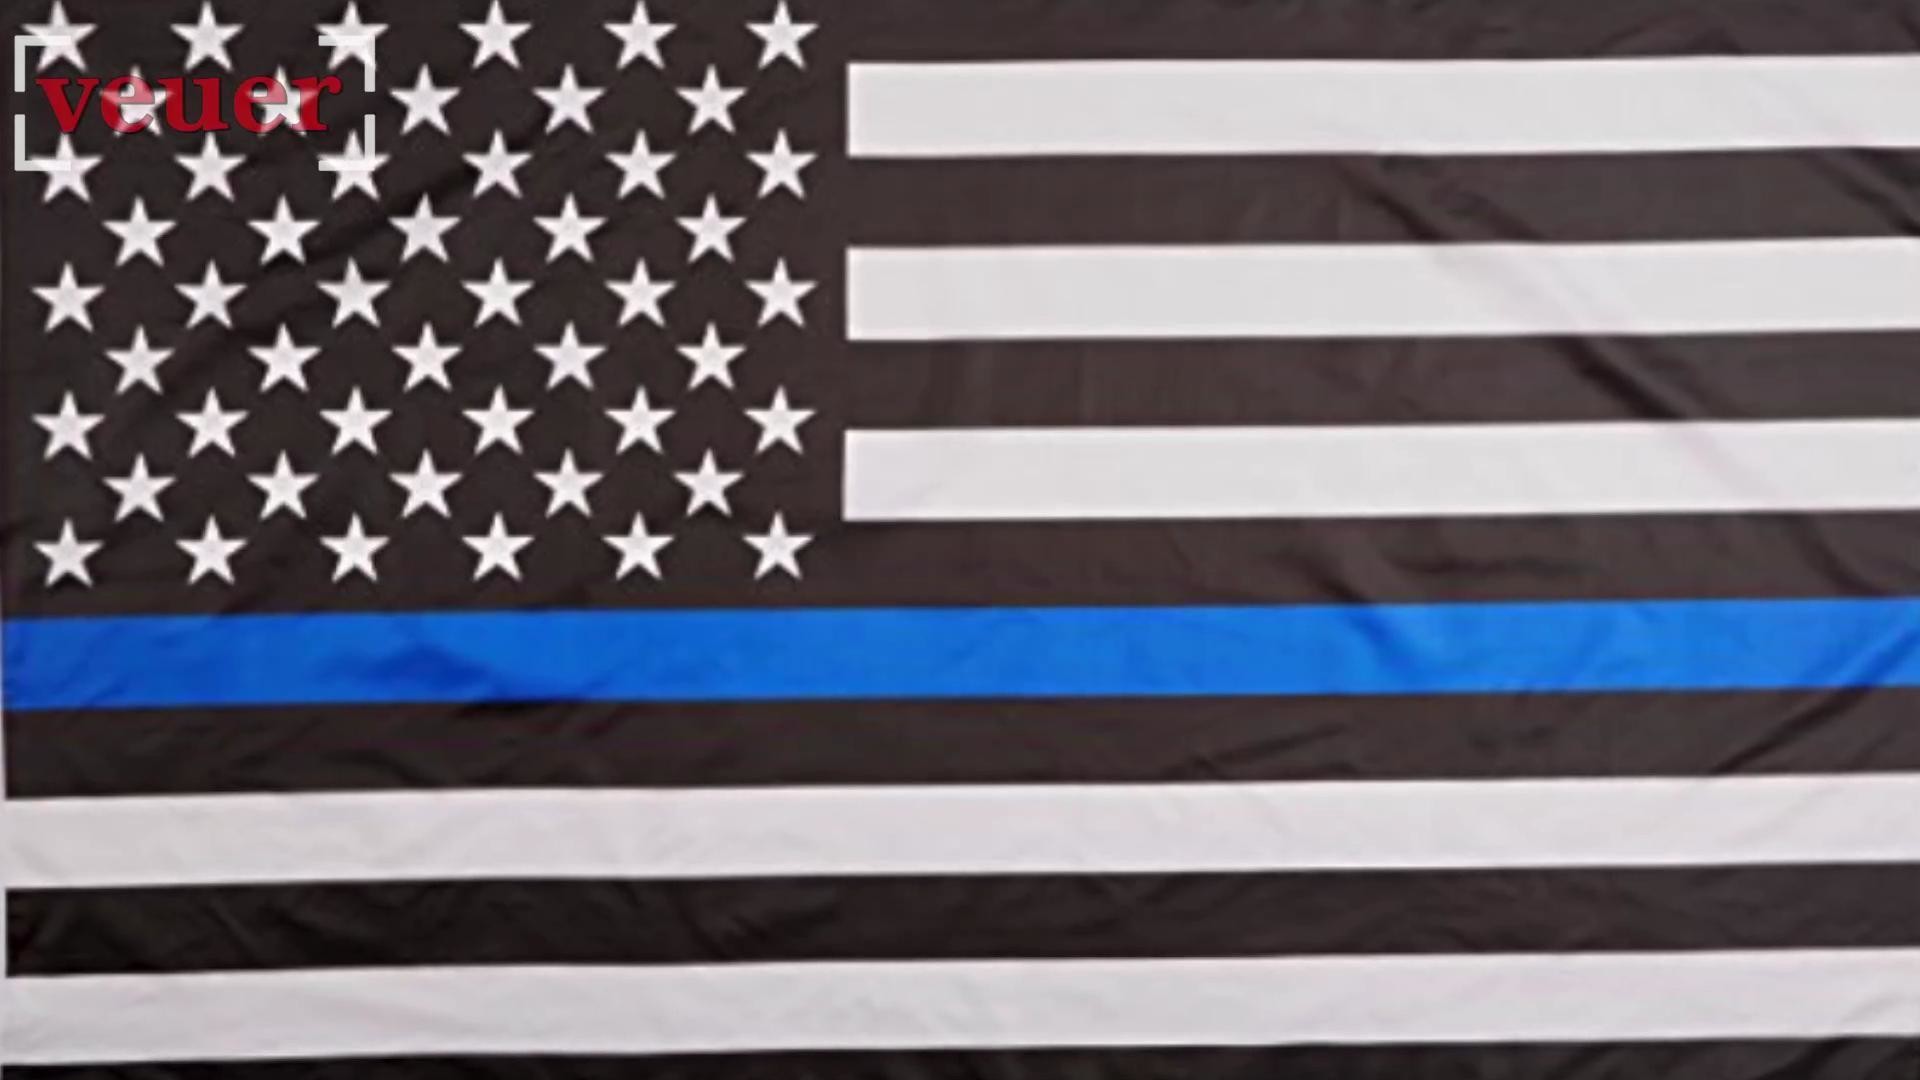 1920x1080 Police officer's daughter asked to remove 'Blue Lives Matter' flag